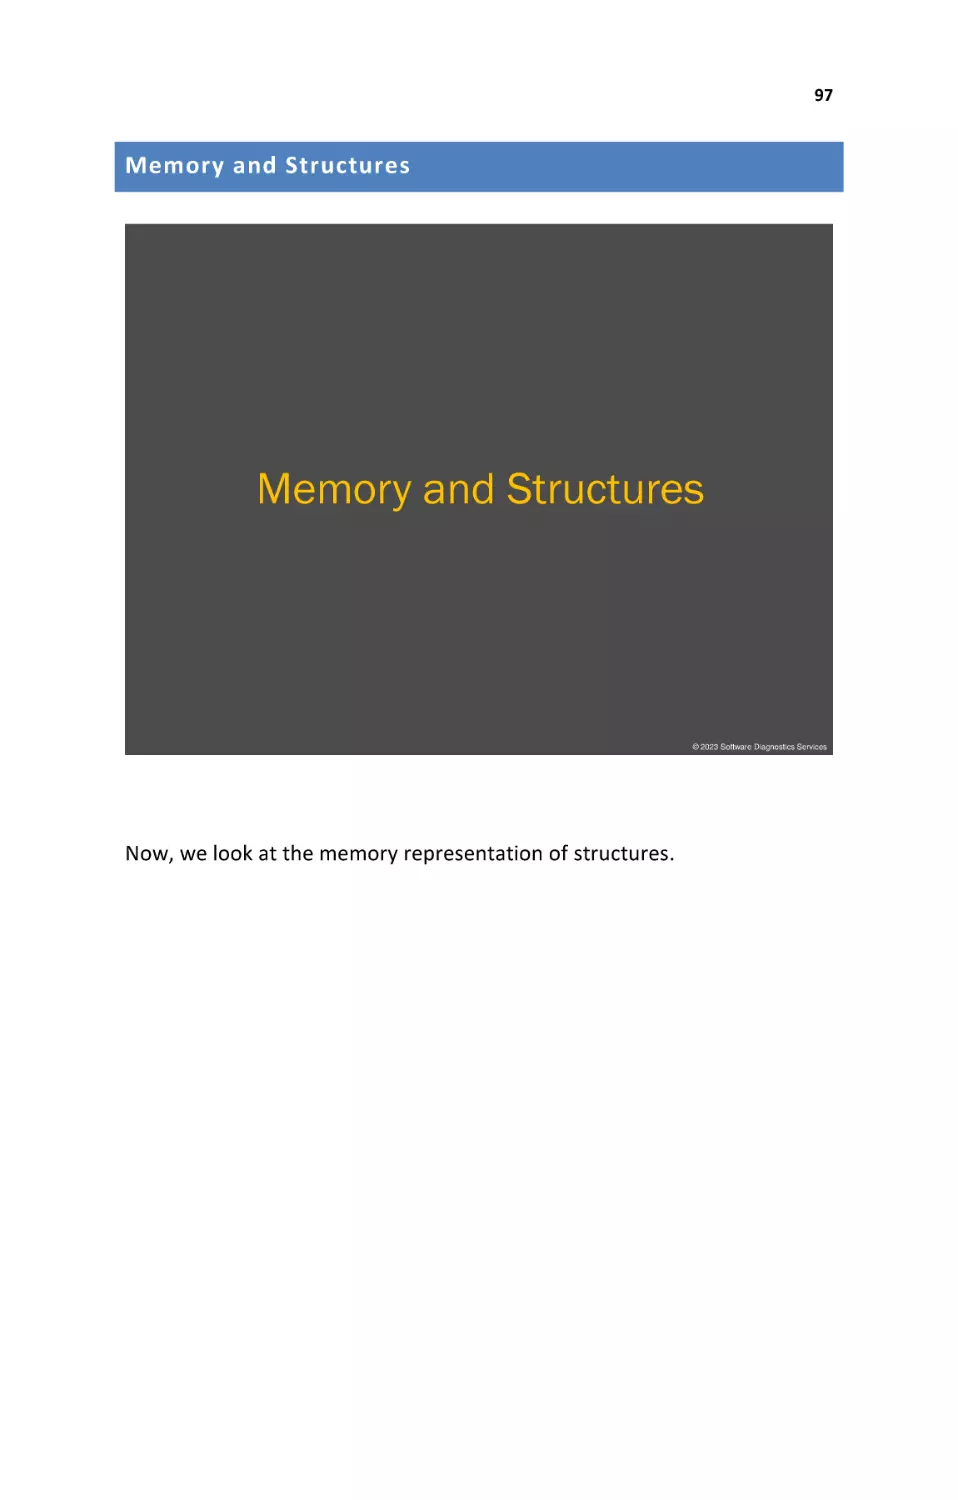 Memory and Structures